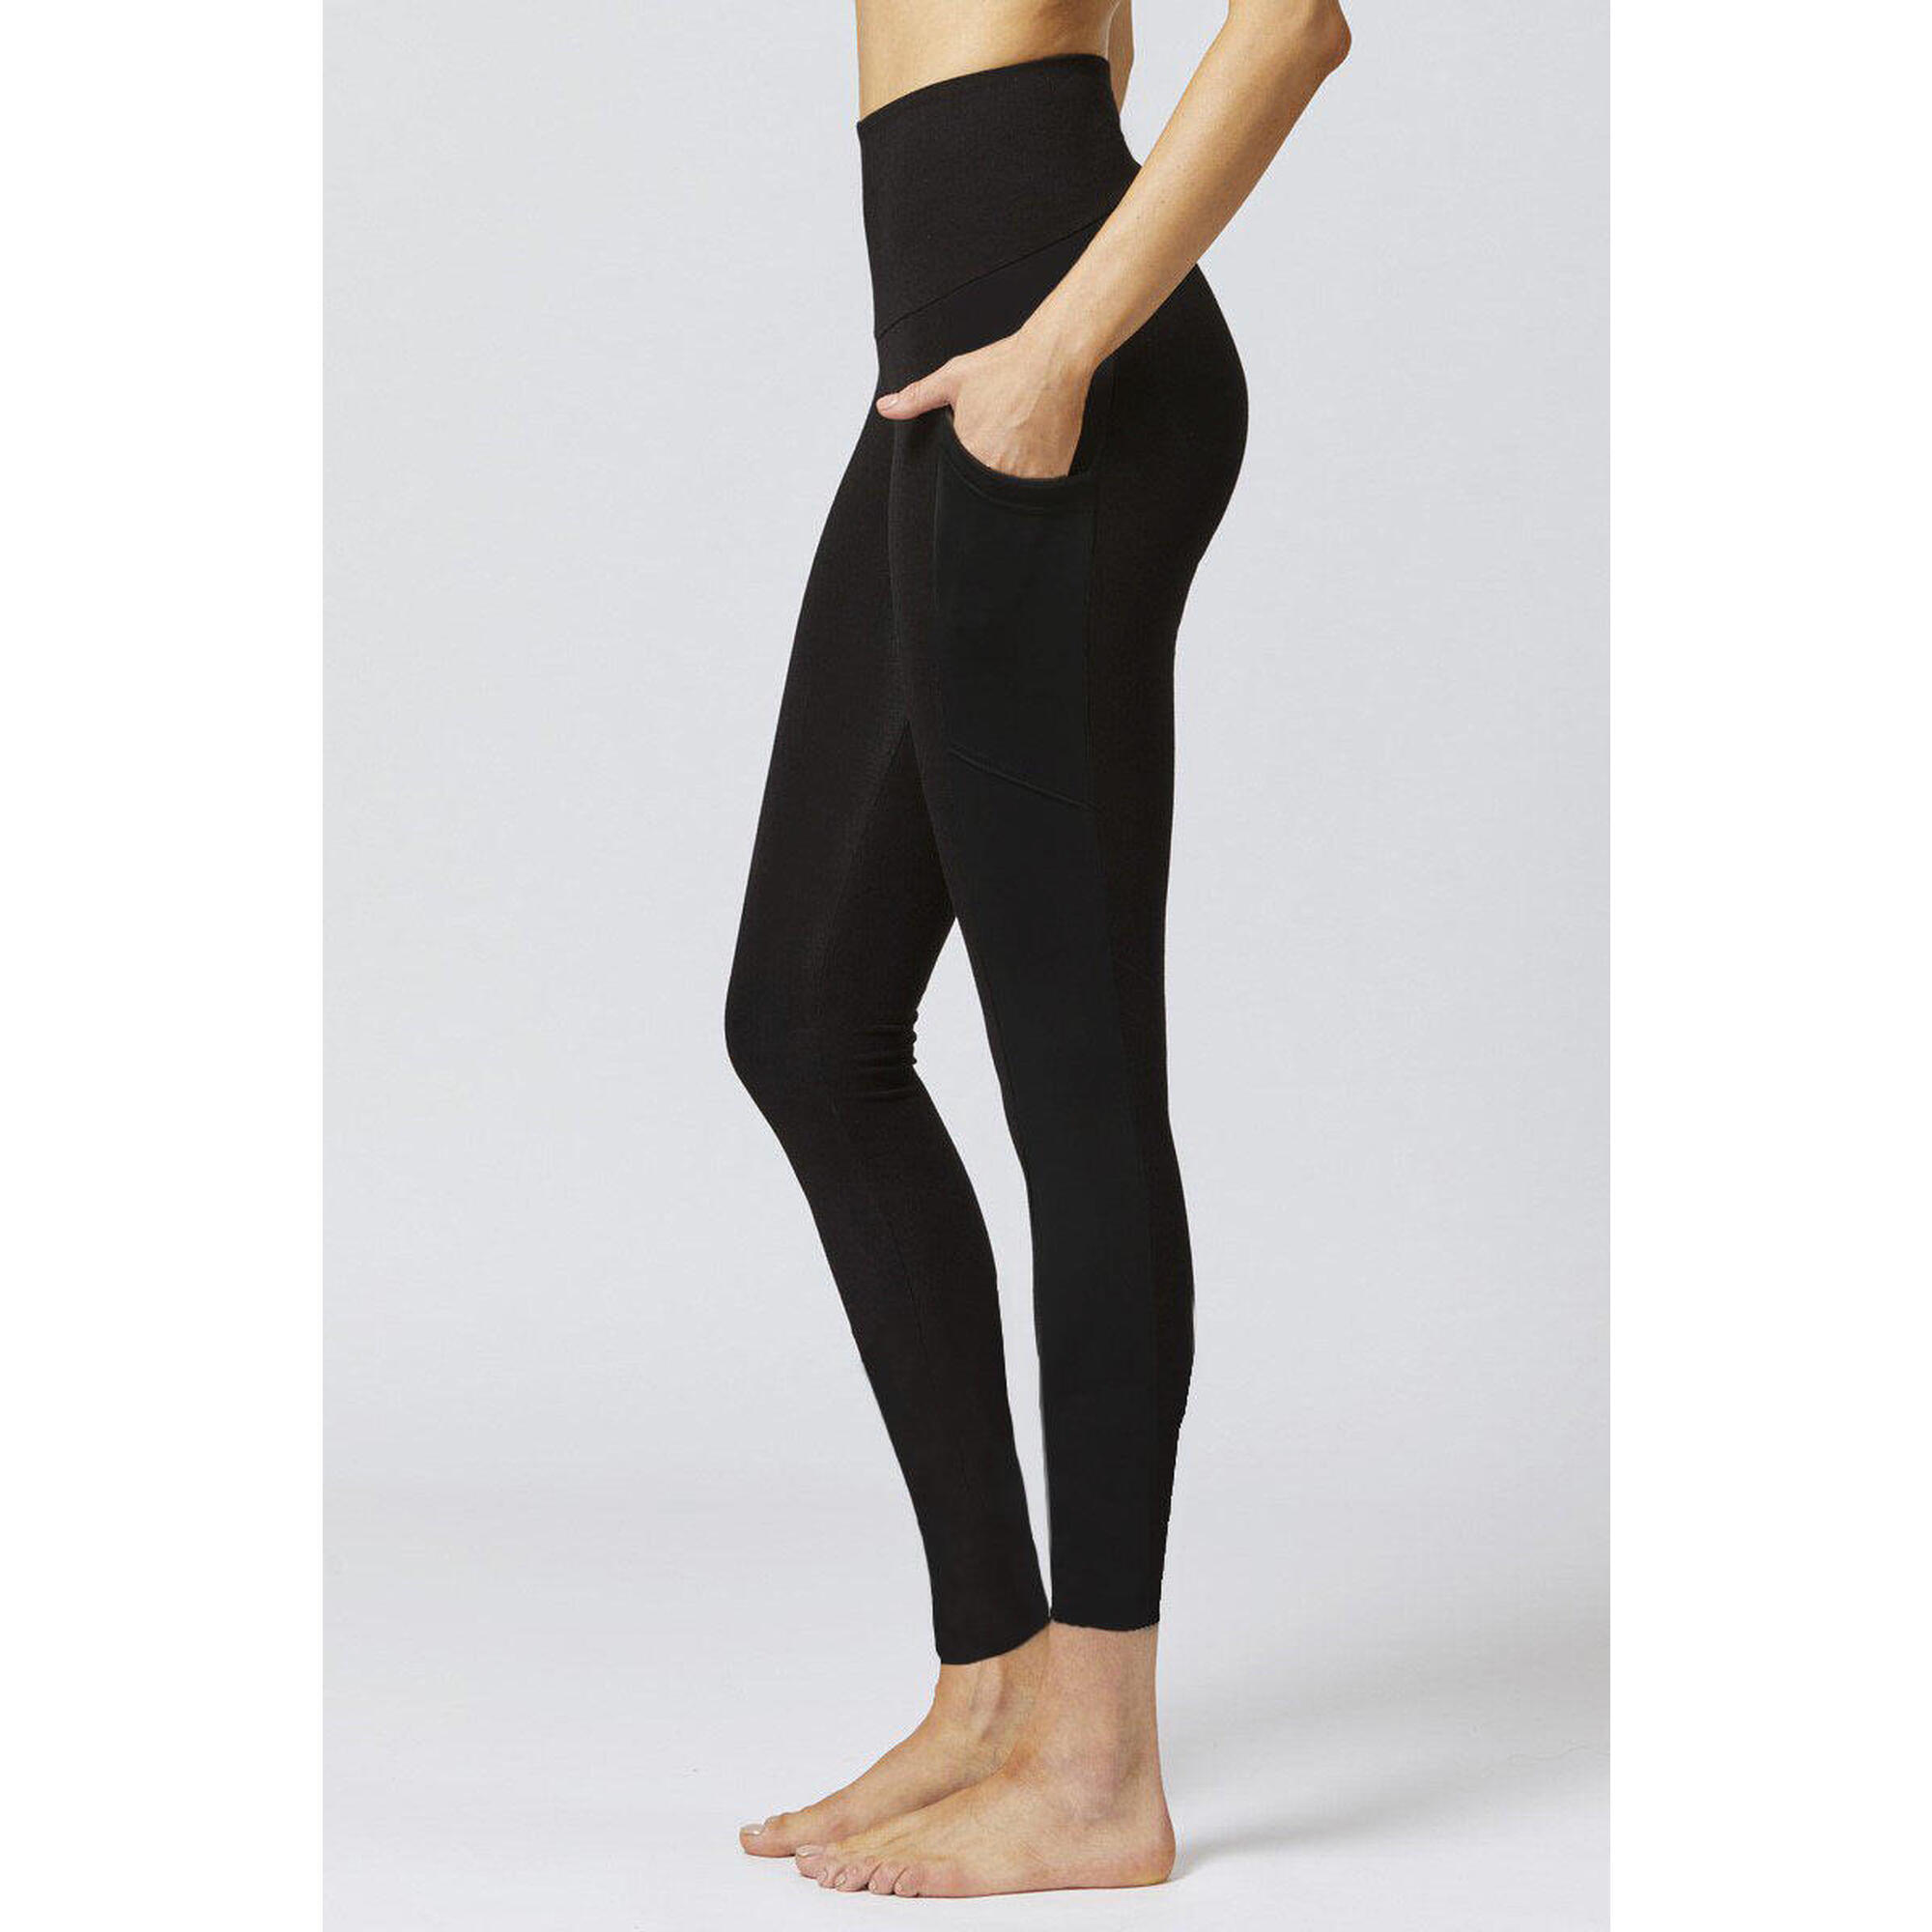 Extra Strong Compression Tummy Control Leggings and Side Pockets Short Leg Black 1/4